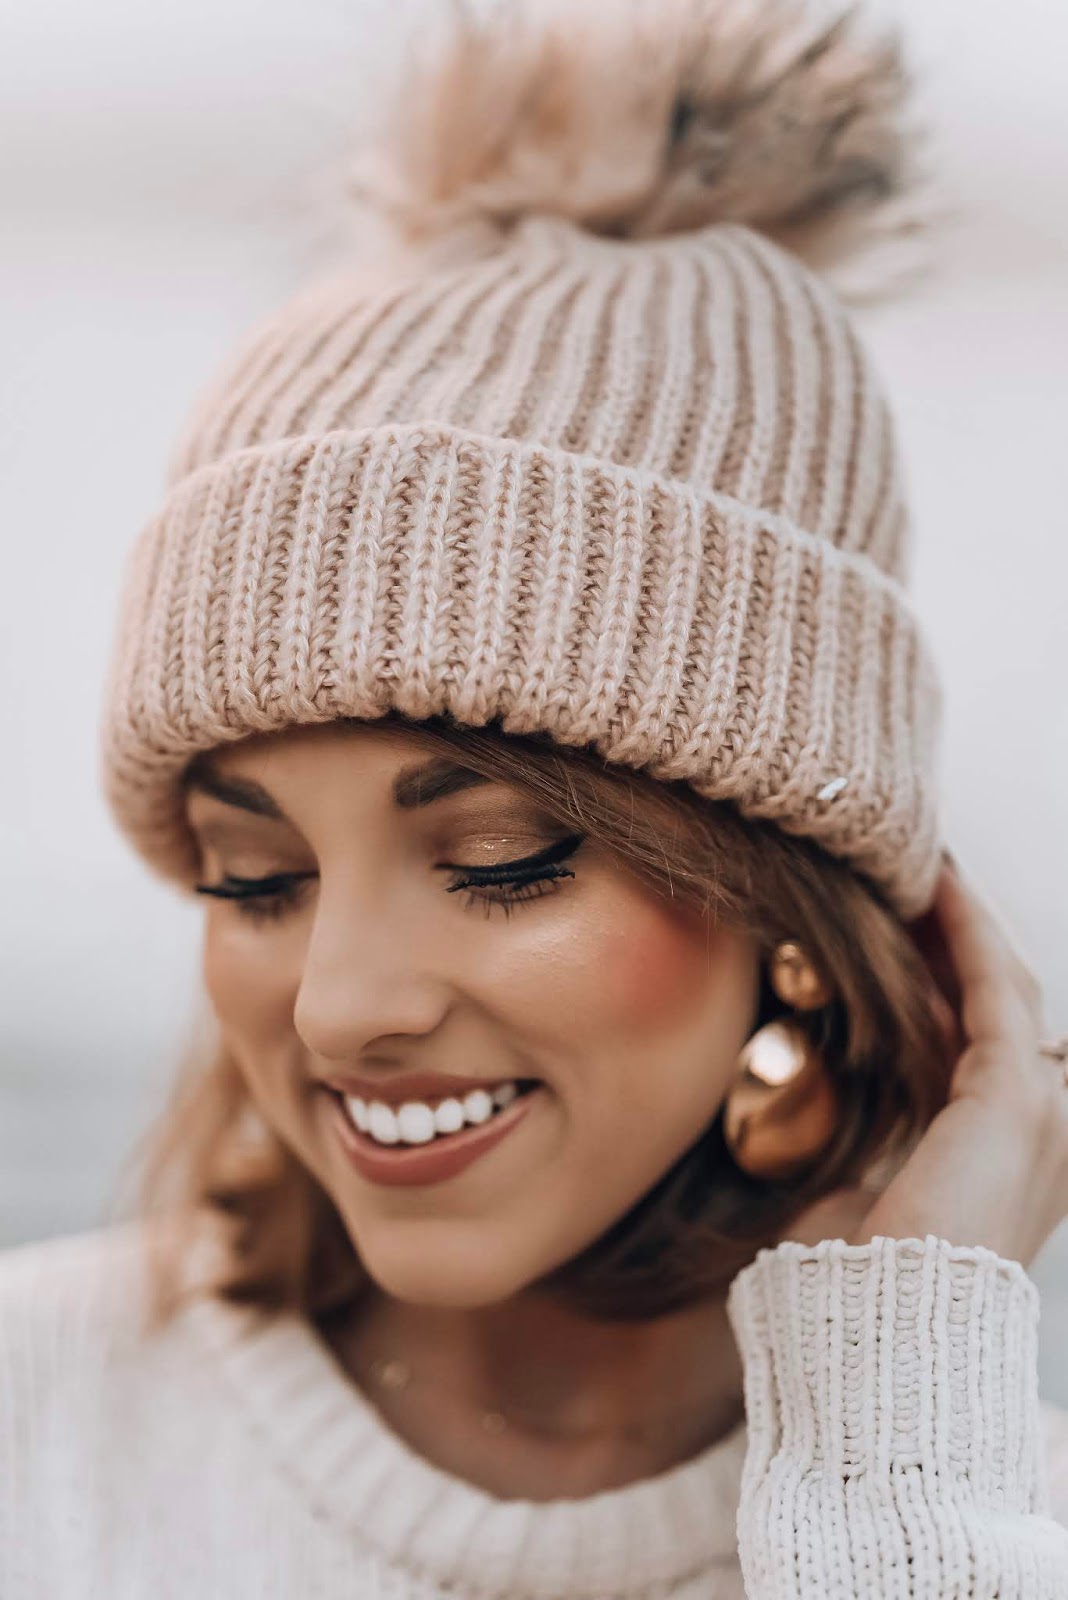 Scallop, Chenille Bow Sweater + 2019 Goals - Something Delightful Blog